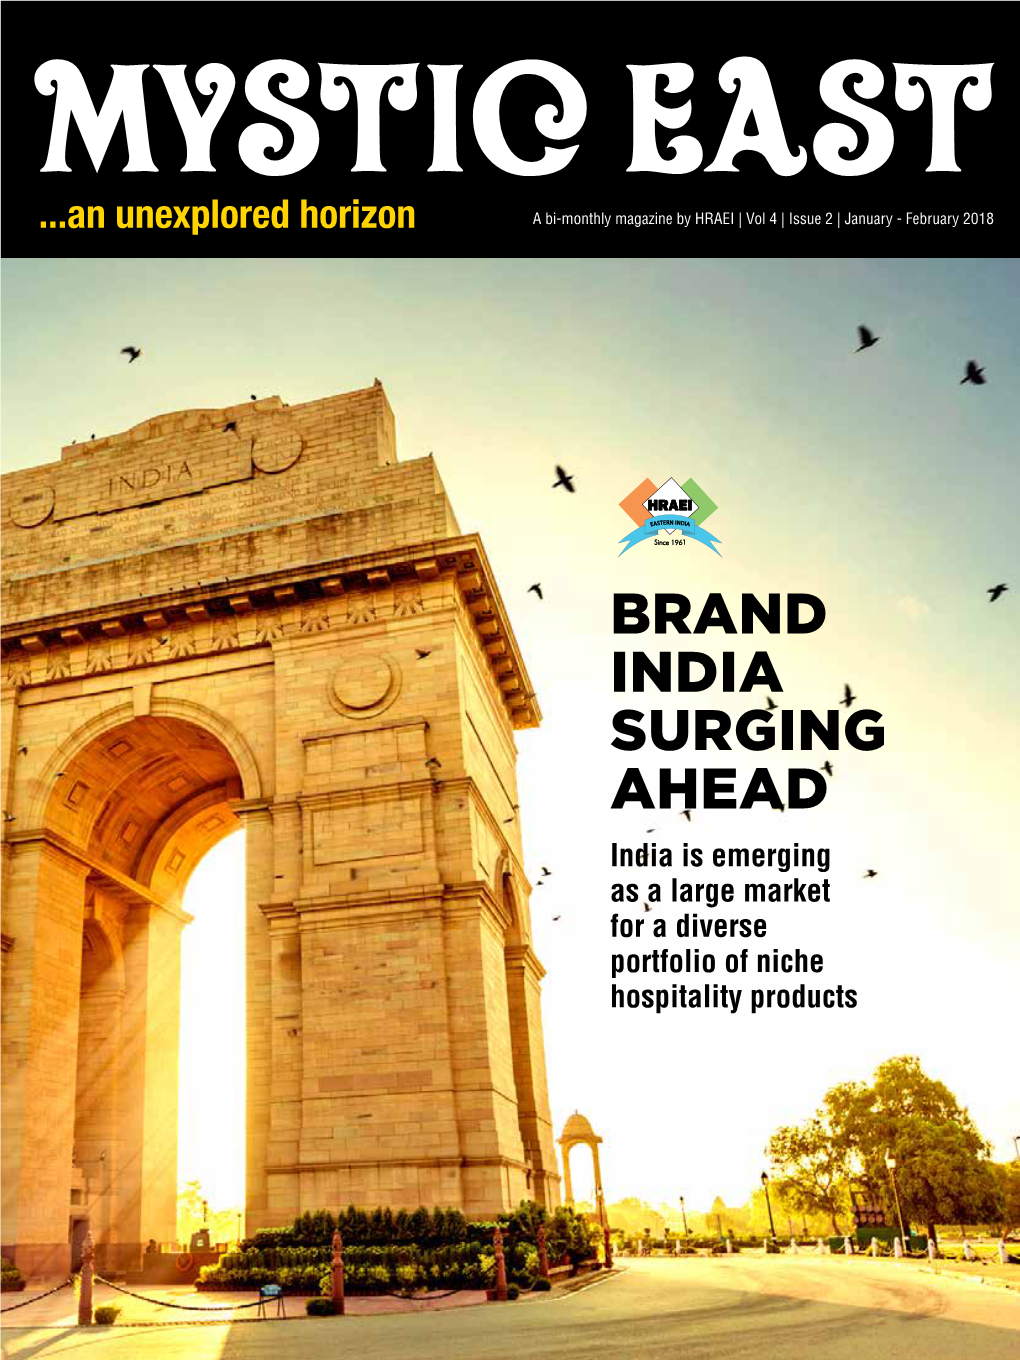 BRAND INDIA SURGING AHEAD India Is Emerging As a Large Market for a Diverse Portfolio of Niche Hospitality Products